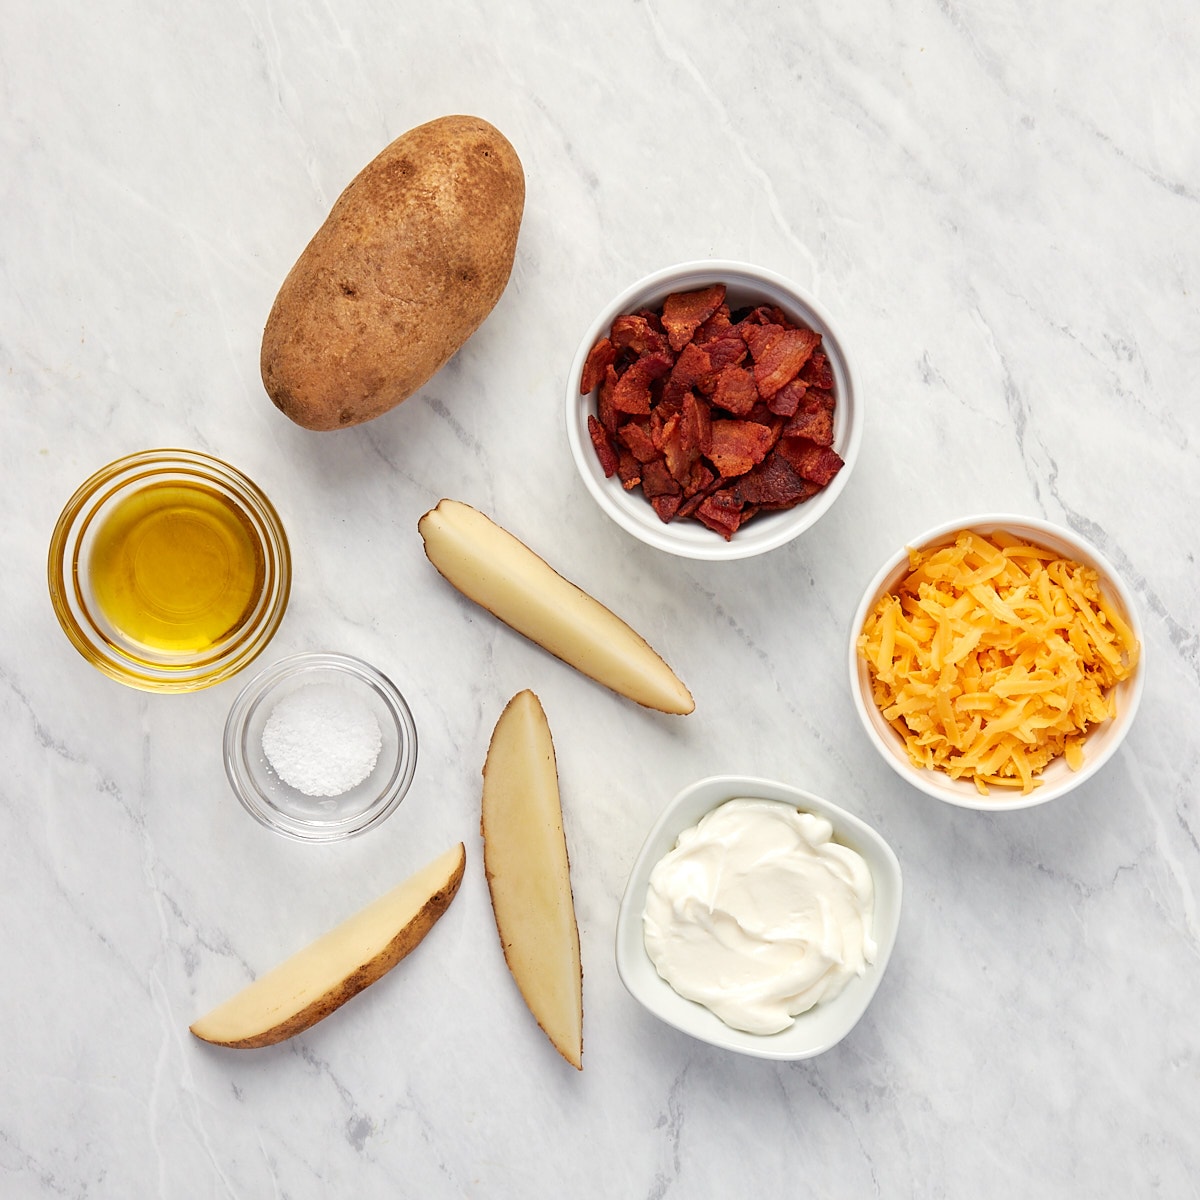 ingredients for potato wedges.